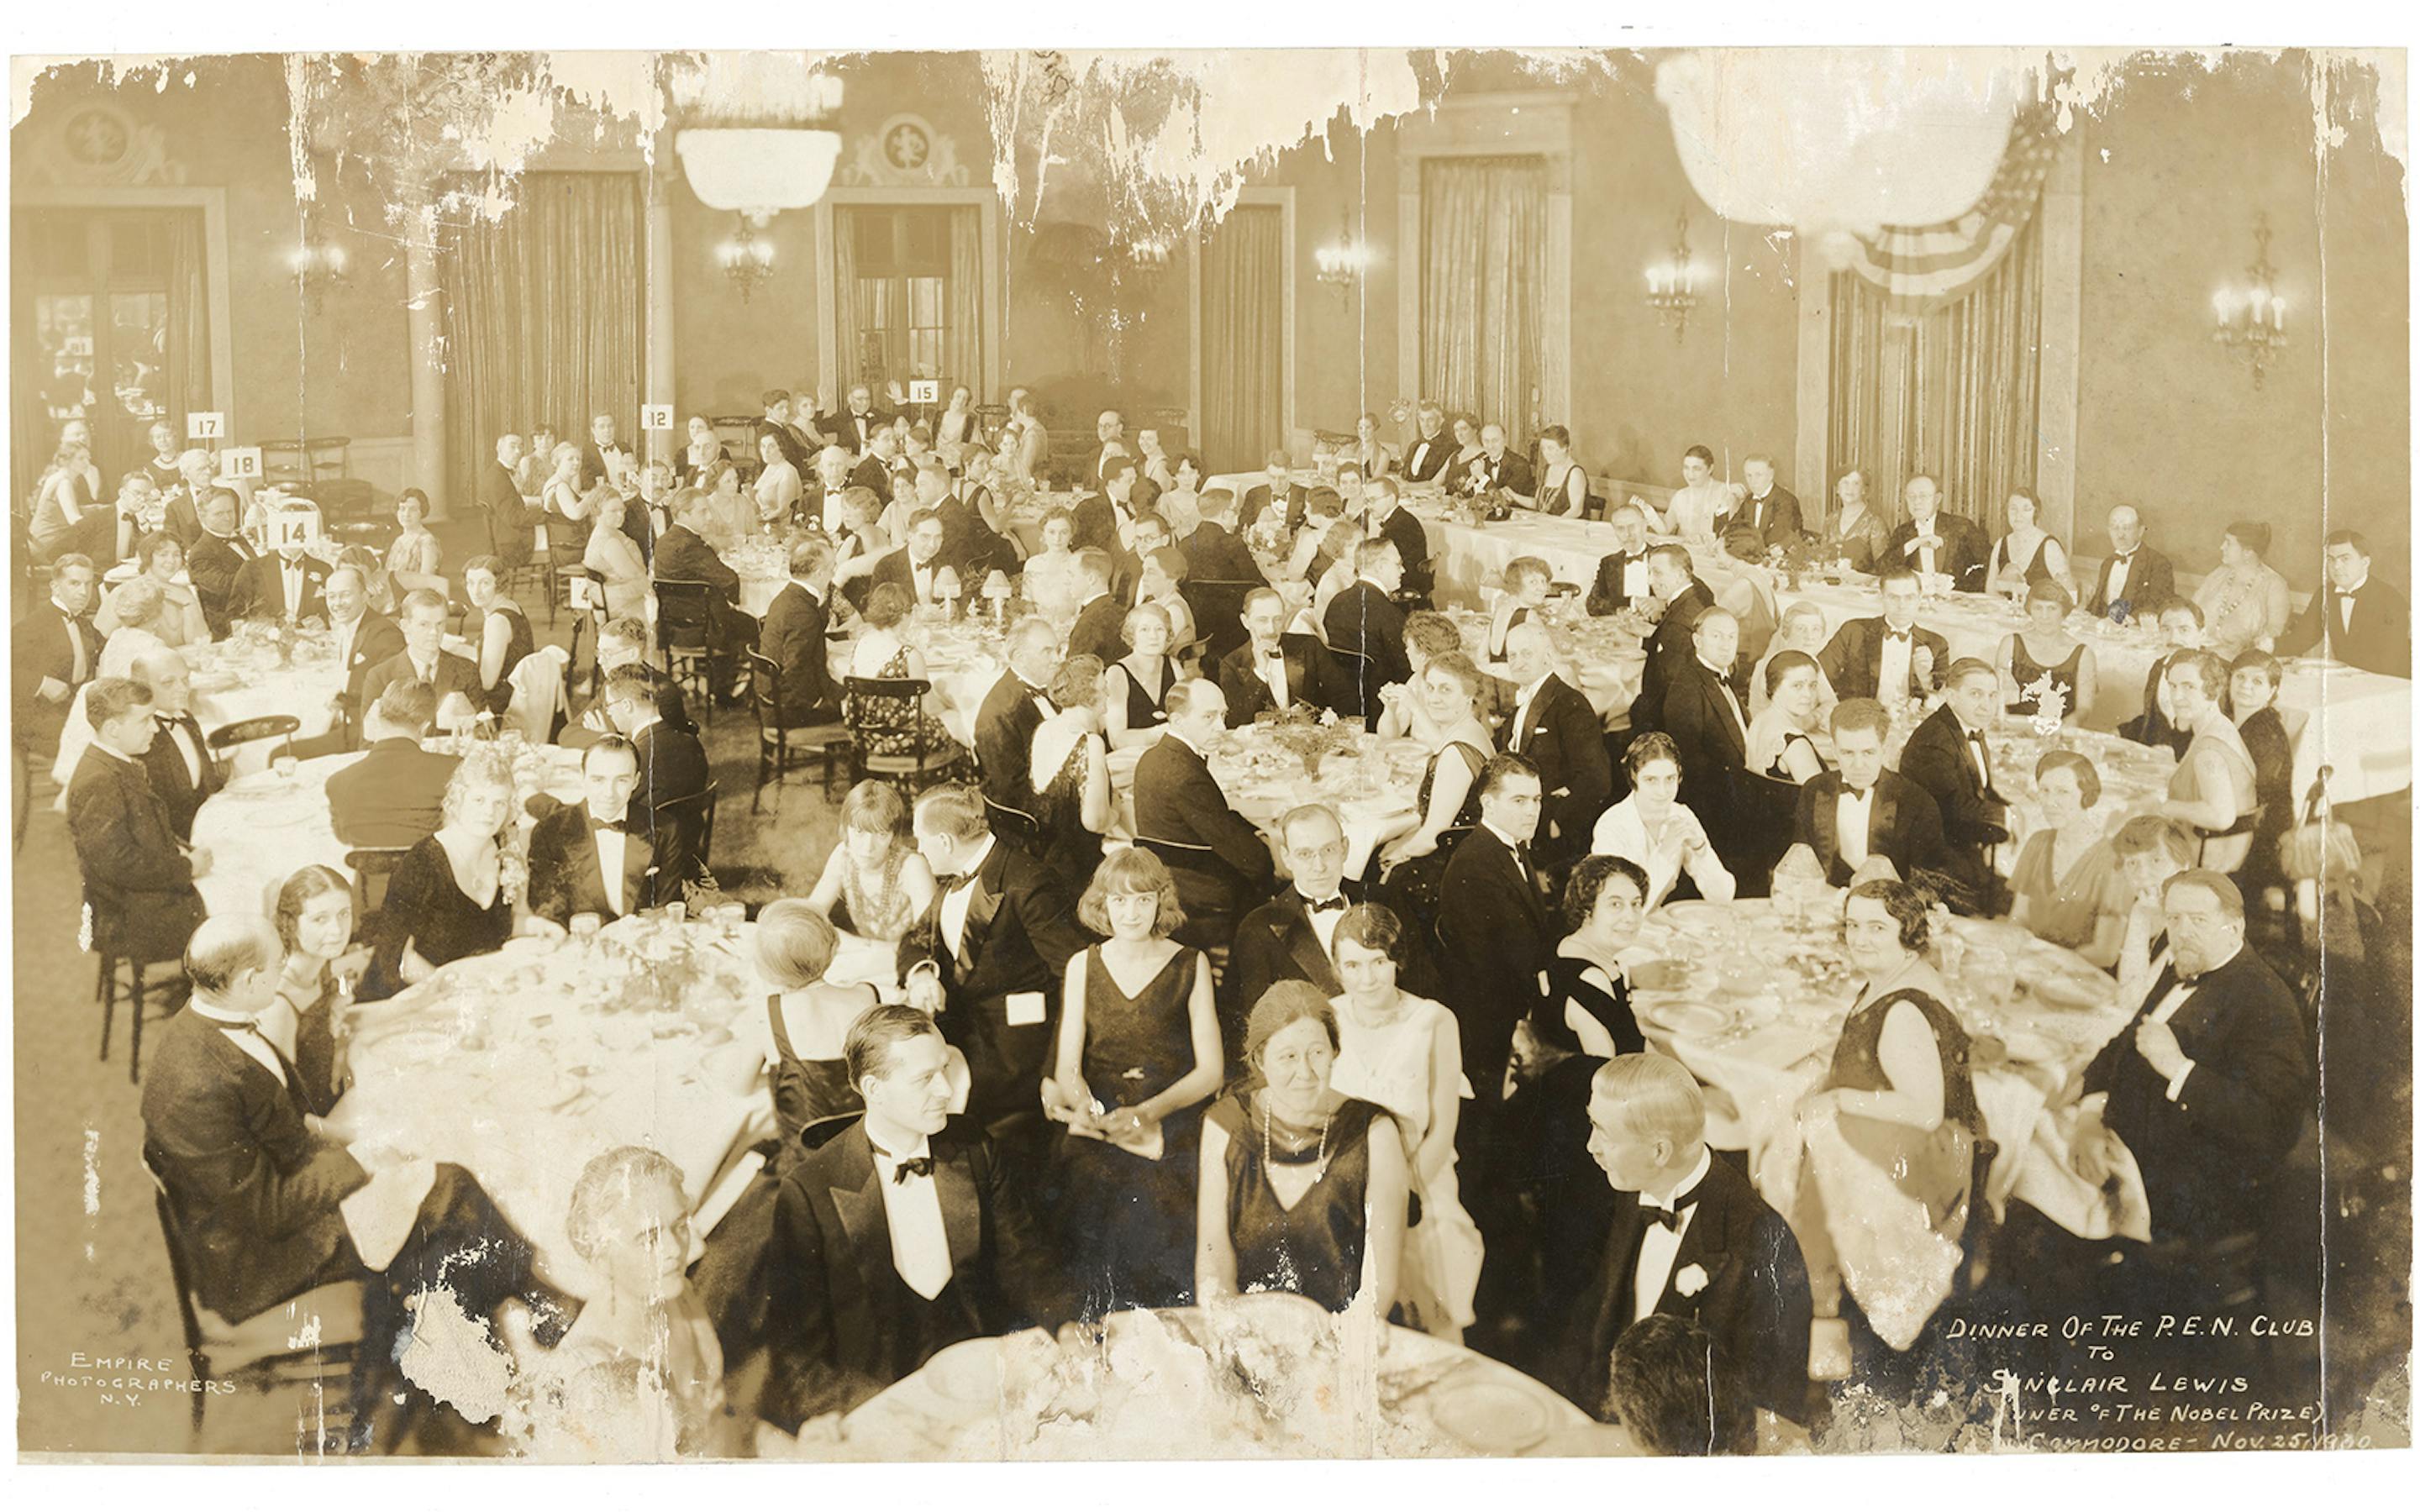 Dinner of the P.E.N. Club to Sinclair Lewis, Winner of the Nobel Prize, Hotel Commodore, November 25, 1930. P.E.N. American Center Records/Princeton University Library